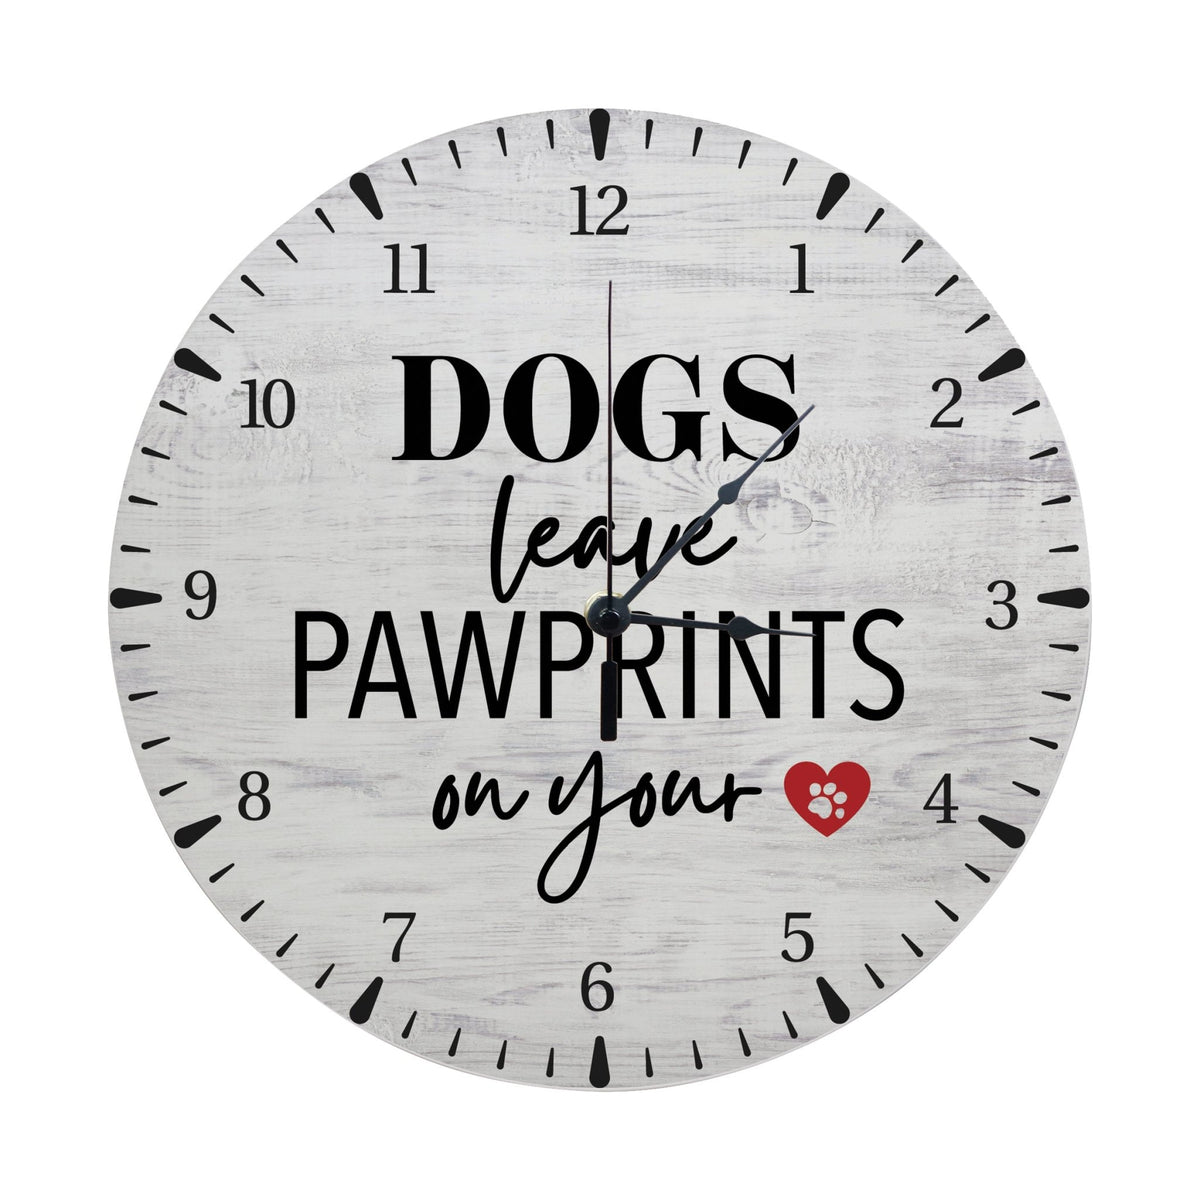 Minimalist Roman Numeral Wooden Clock For Walls Or Countertop Display For Pet Owners - Dog Leaves Pawprints - LifeSong Milestones